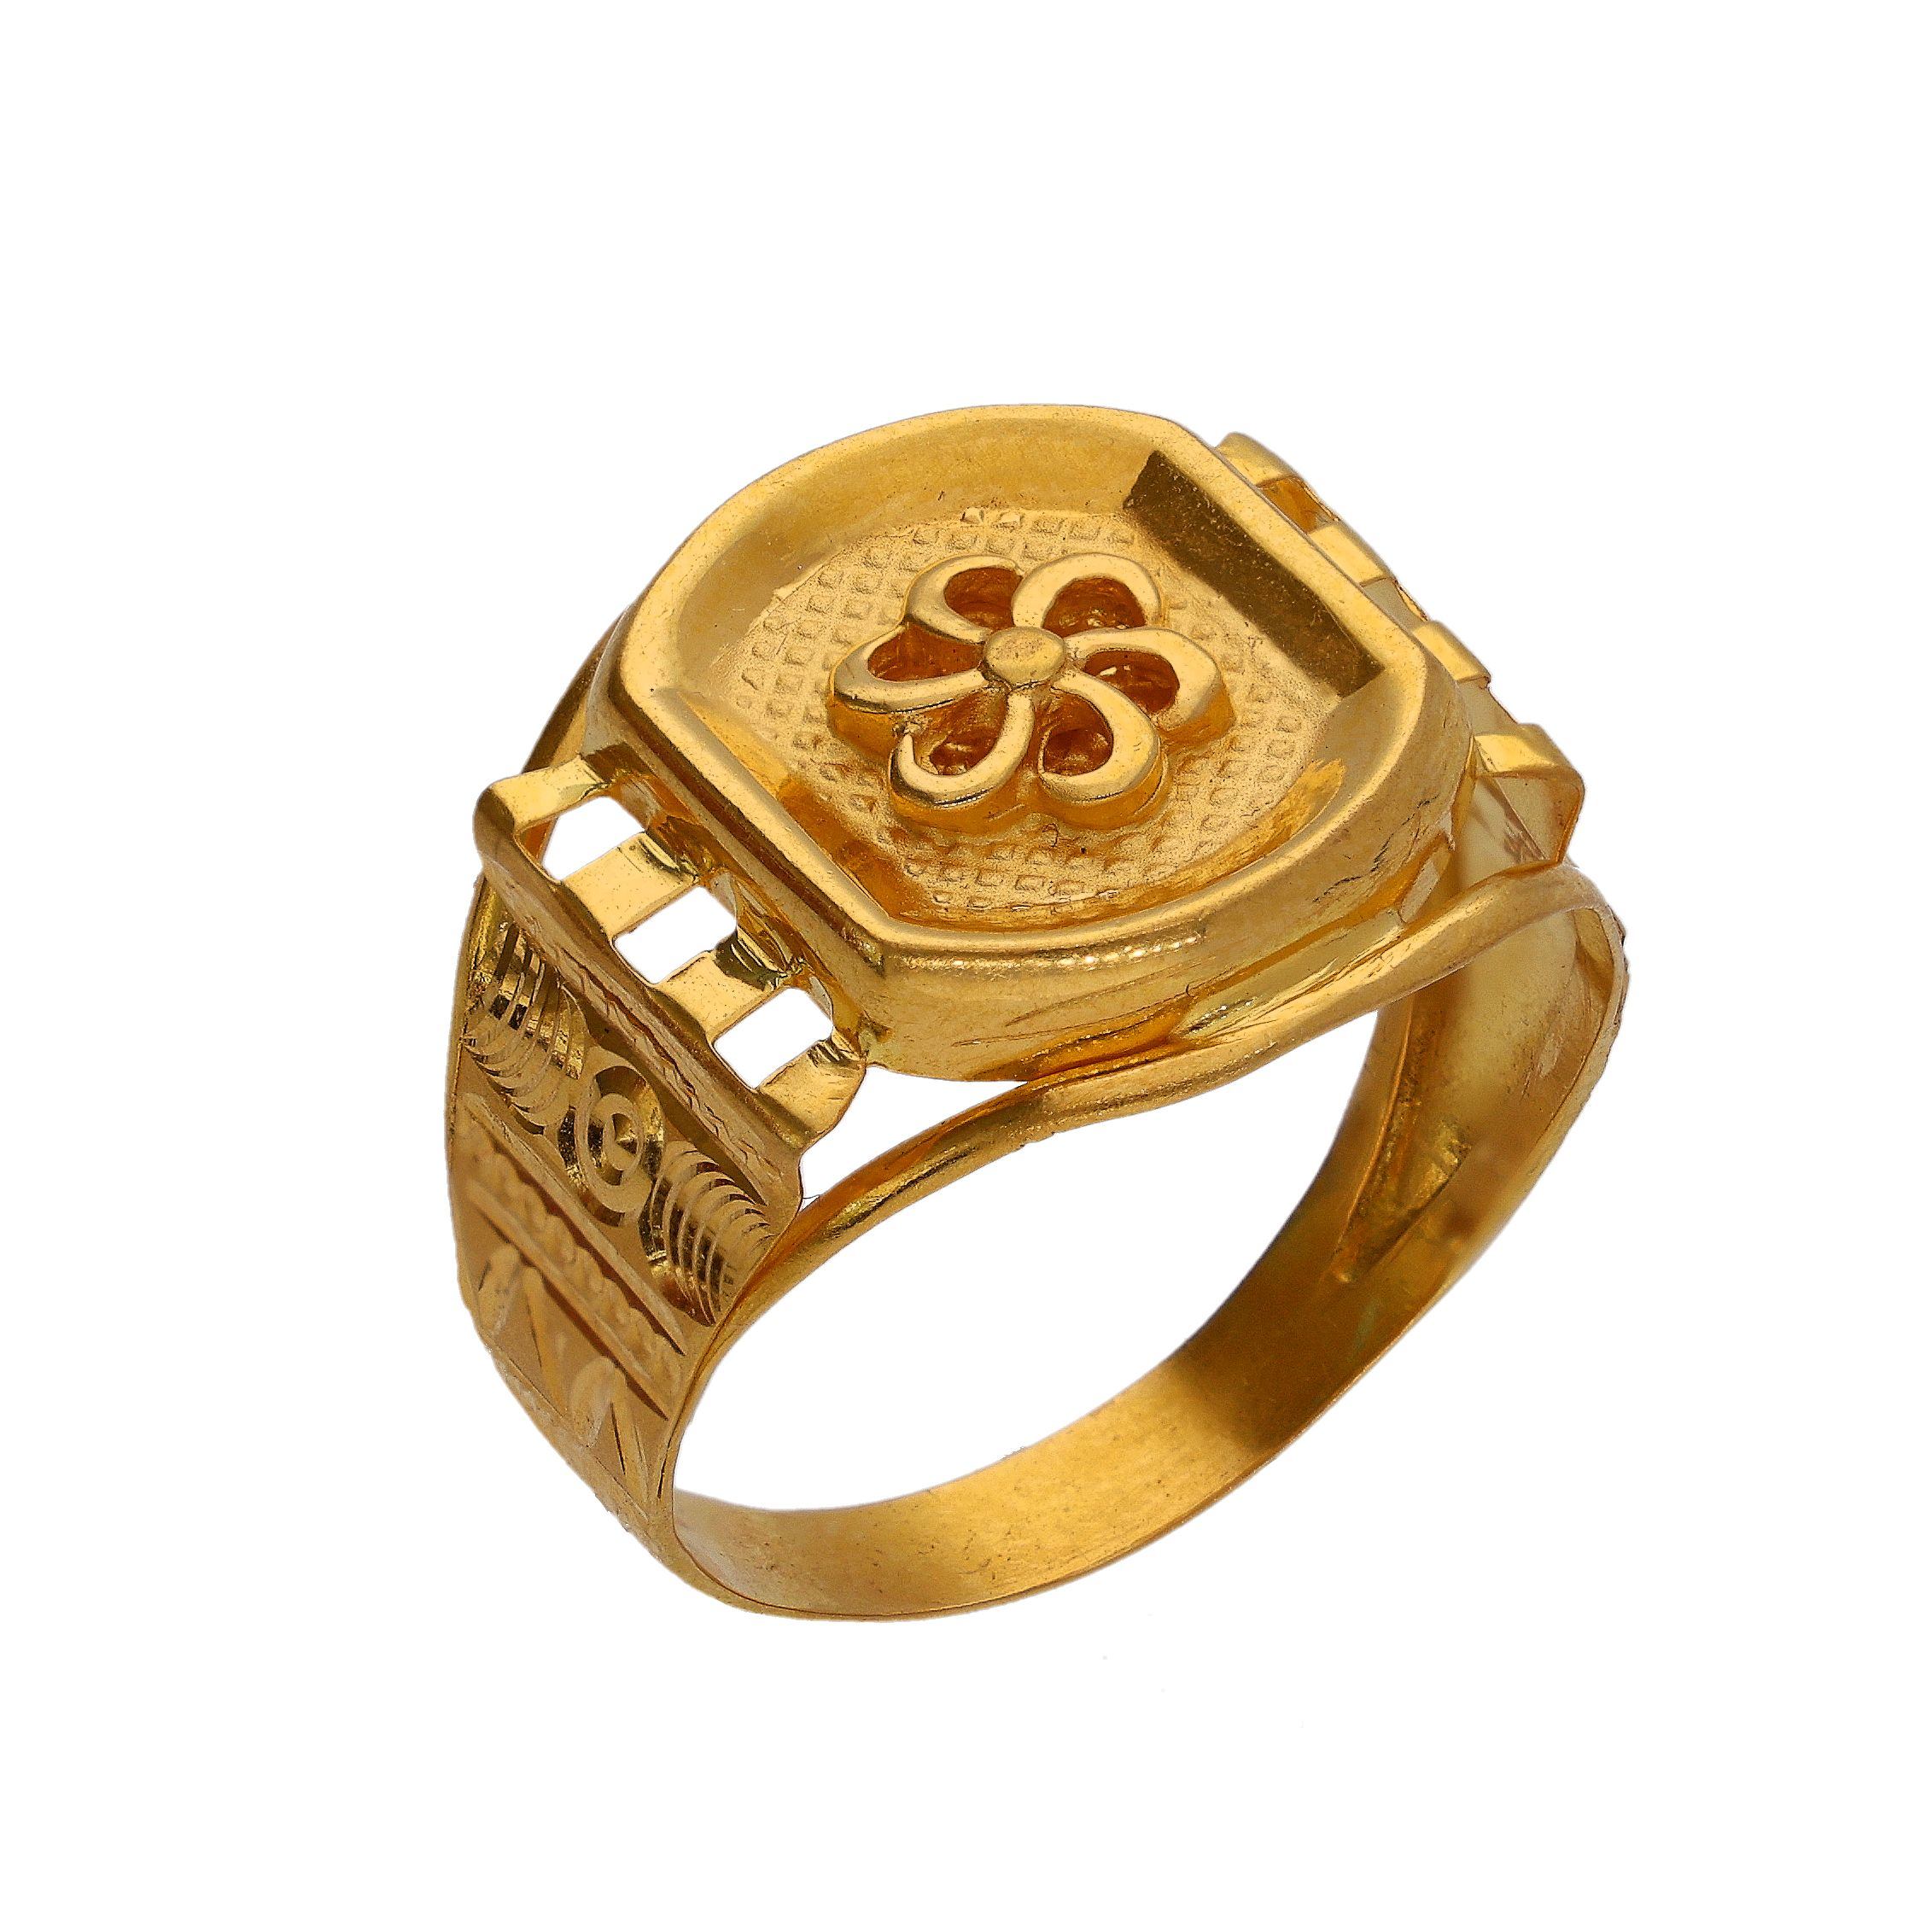 Lalithaa Jewellery | Best Gold and Diamond Jewellery Shopping Store